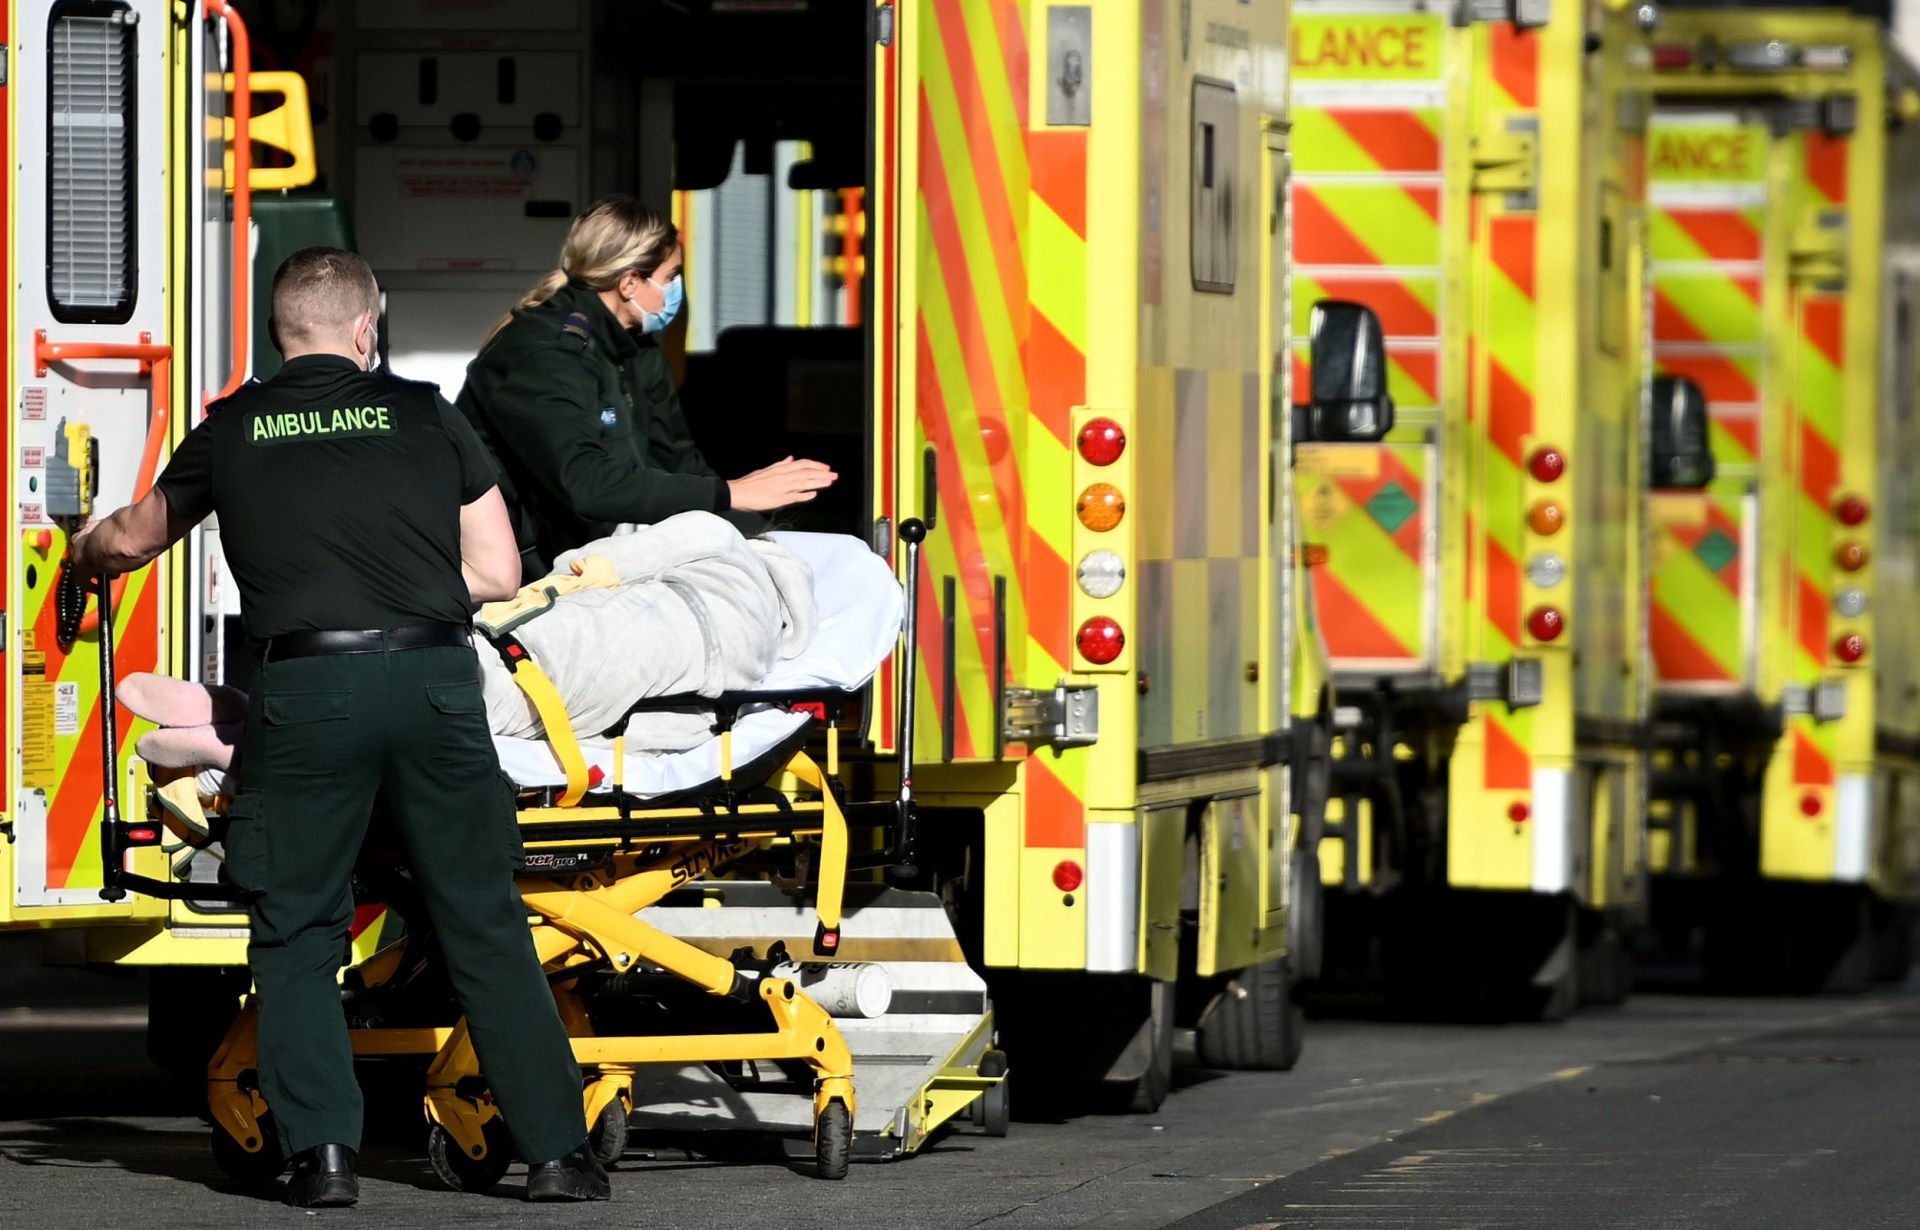 a patient said they couldn't get to a&e. i was stunned when i arrived in the ambulance